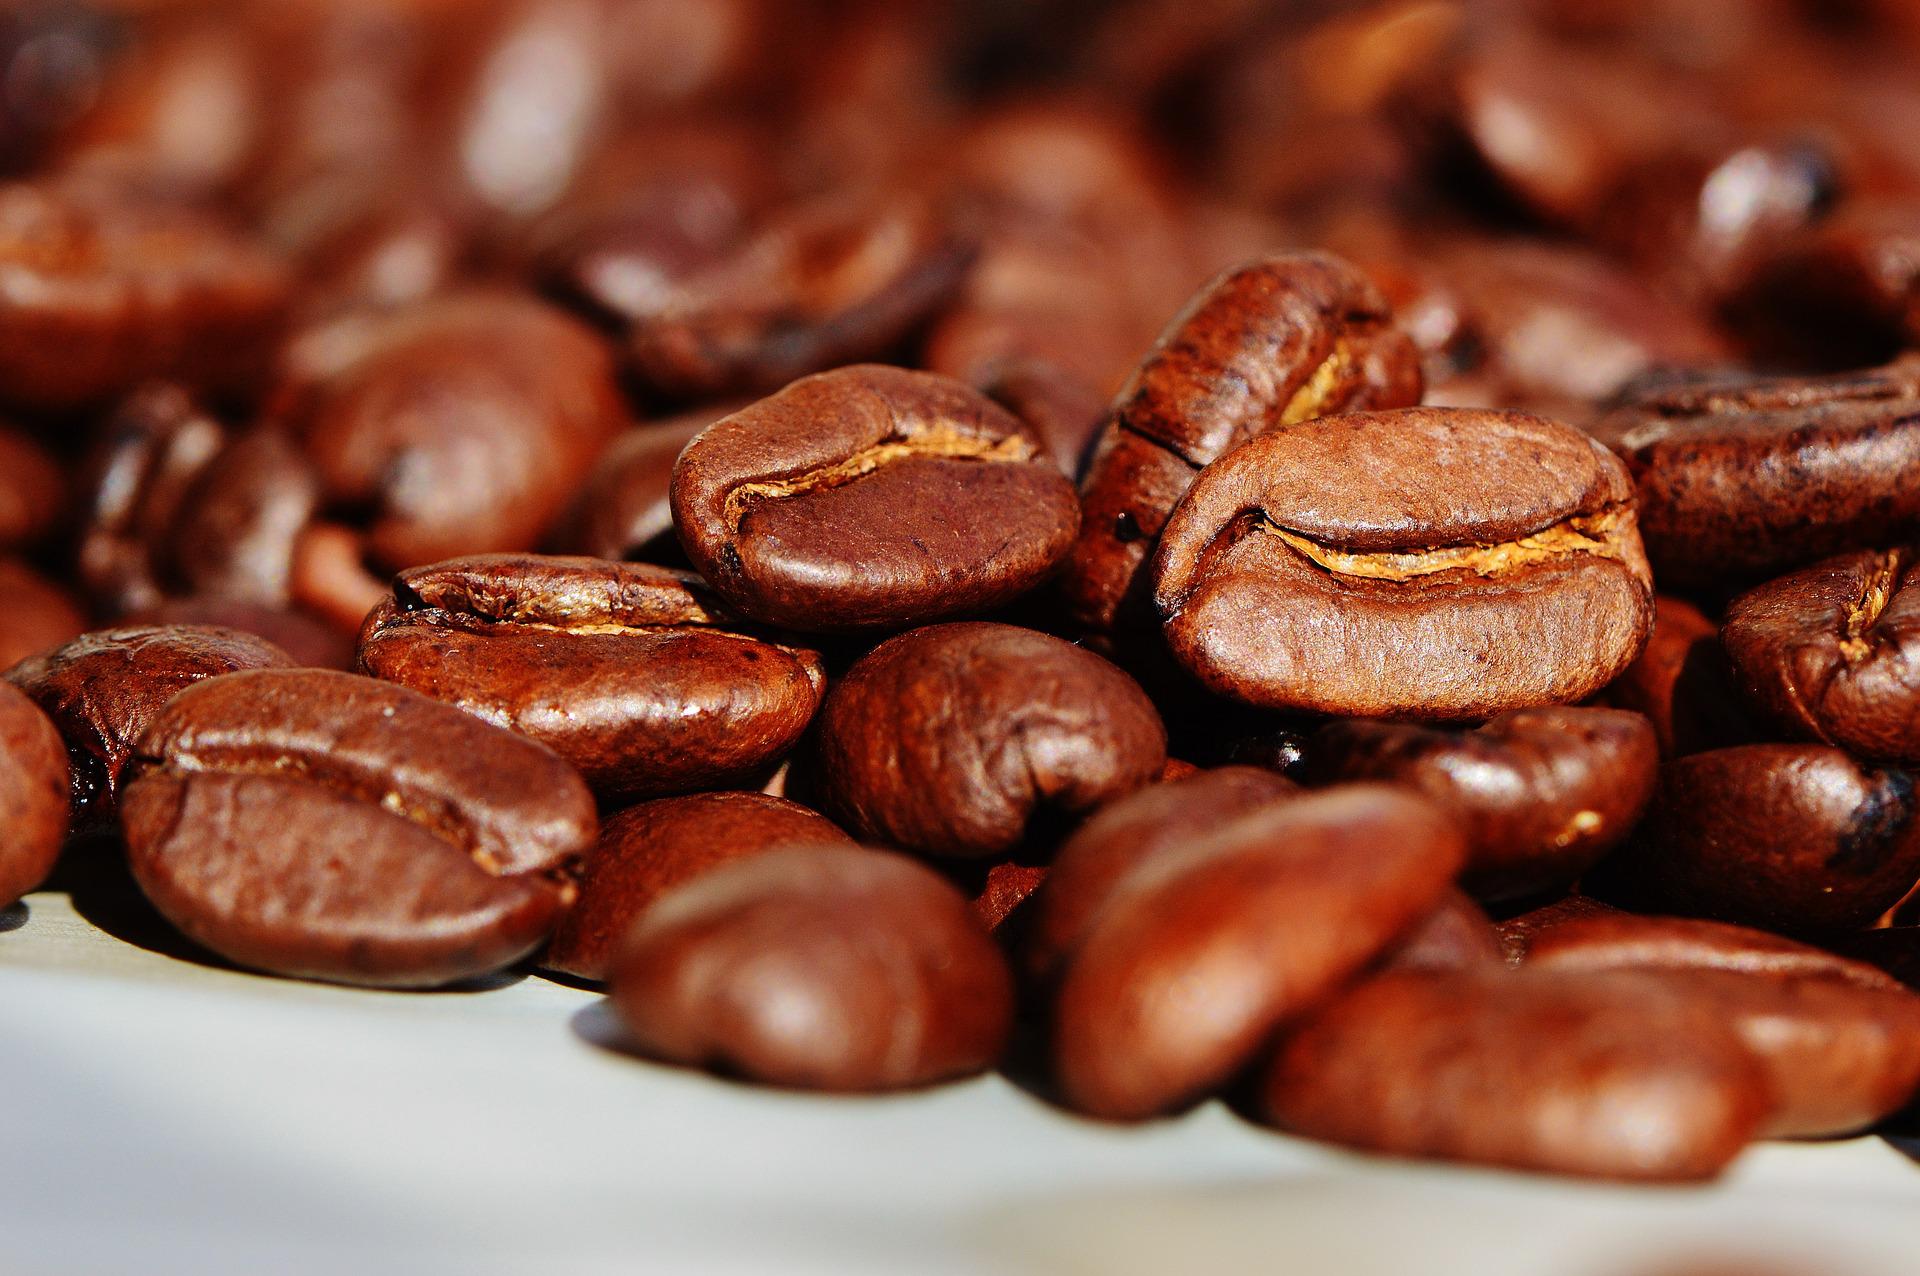 Top 5 Must-Try Specialty Coffee Beans In 2022